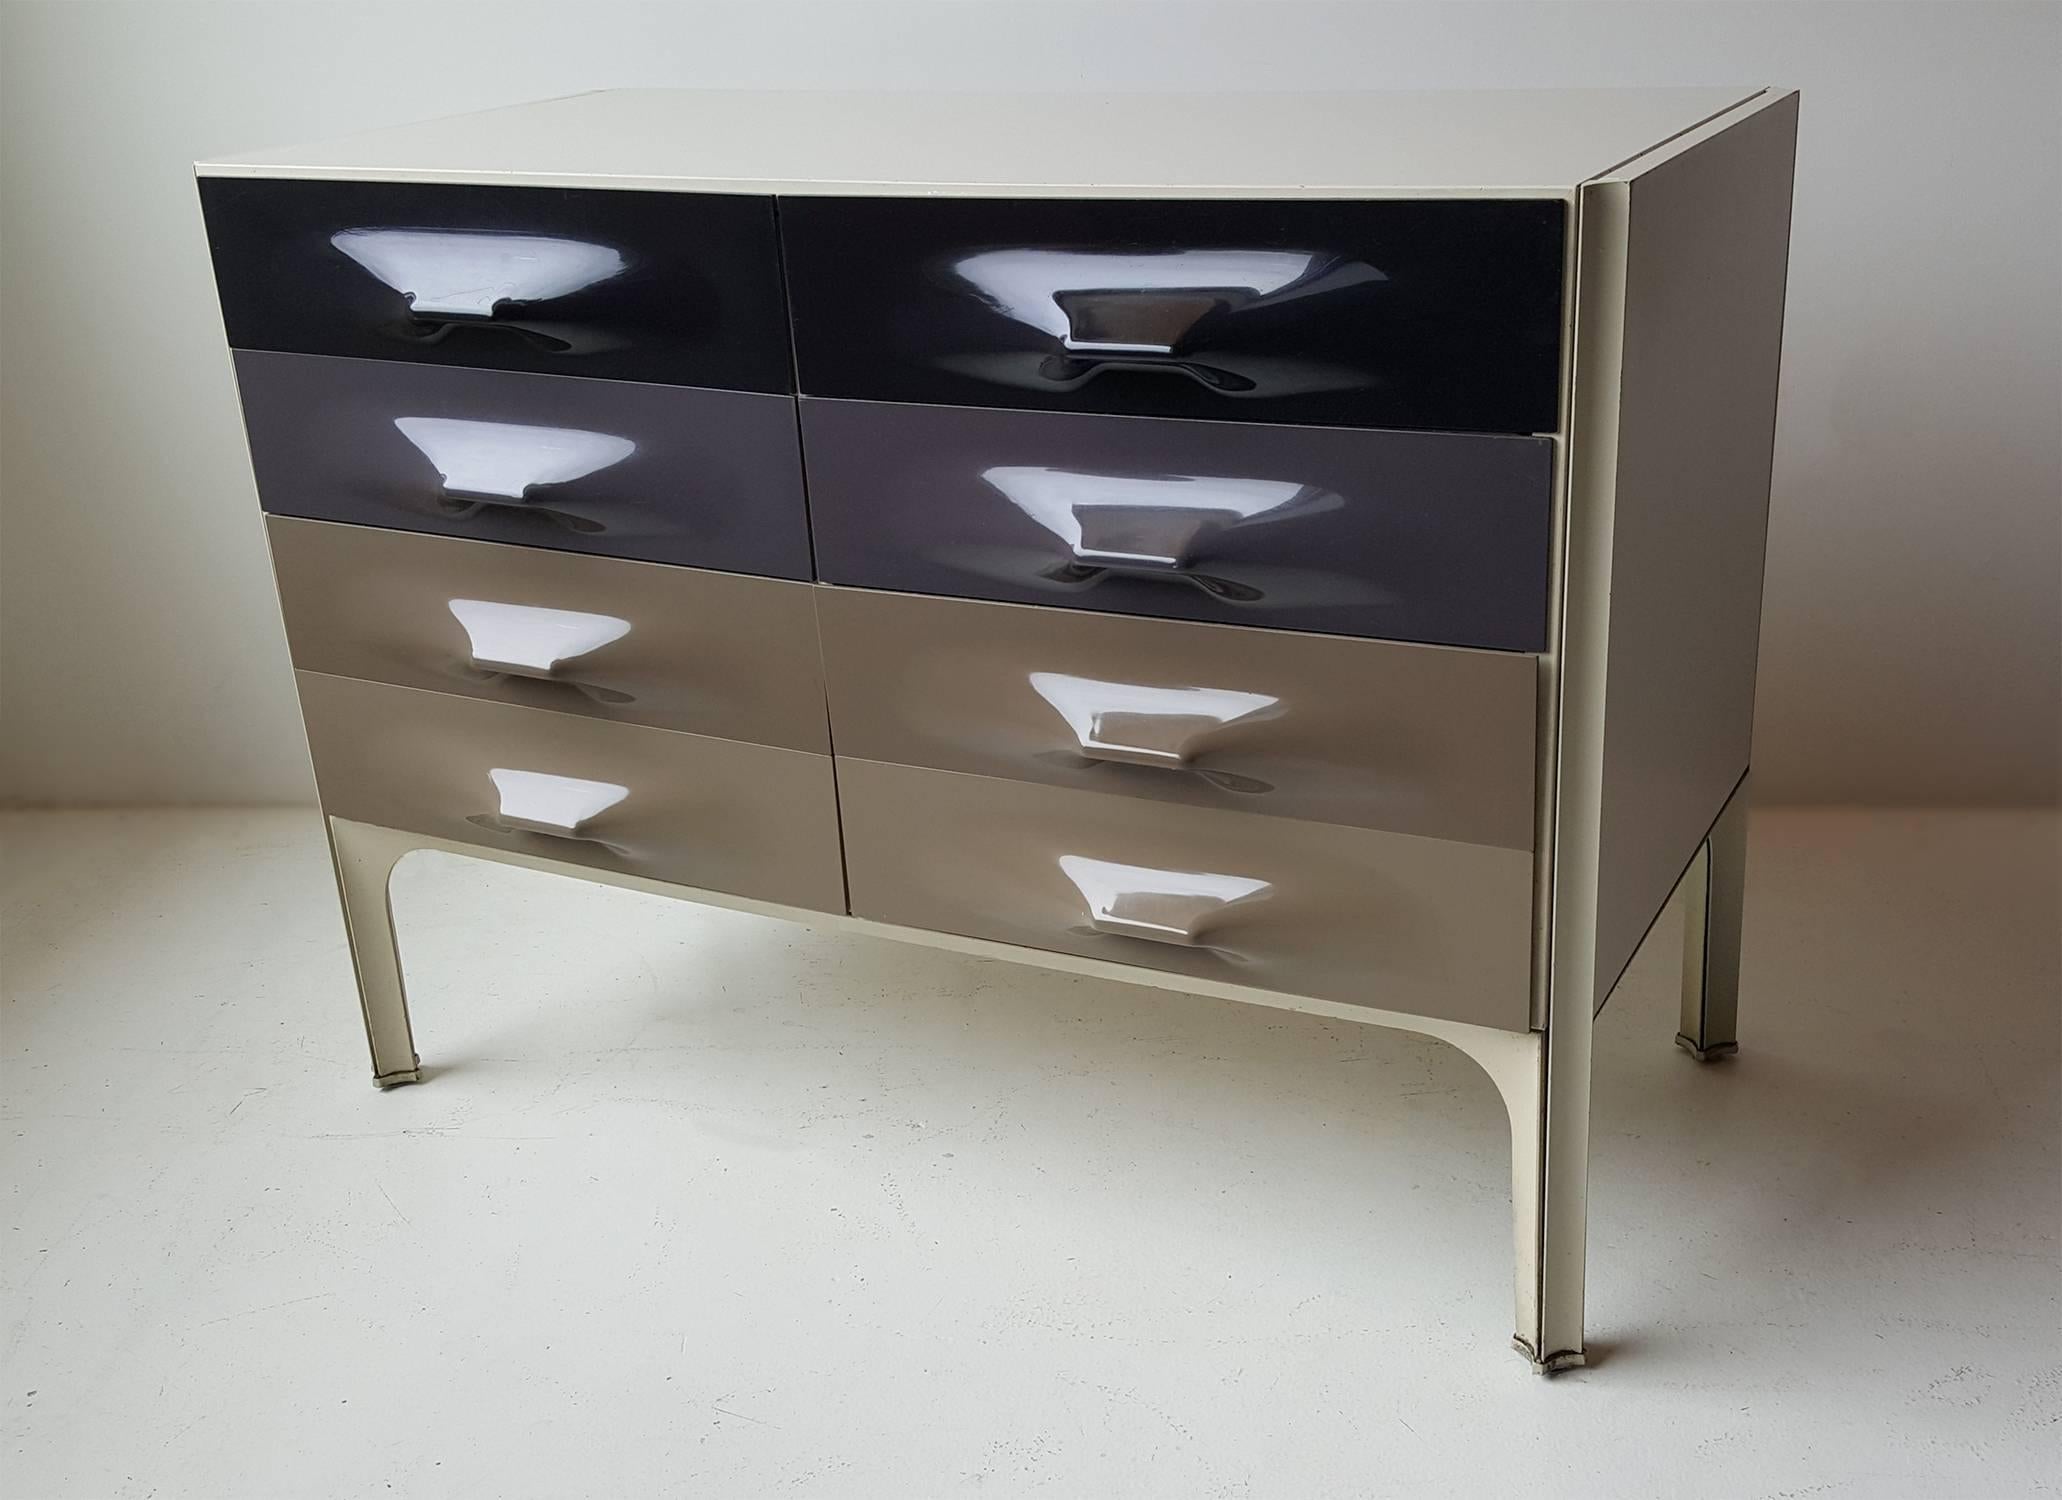 Futuristic DF-2000 chest of drawers designed by the father of 20th century Industrial Design, Raymond Loewy. Six drawers total with vacuum formed plastic handles.